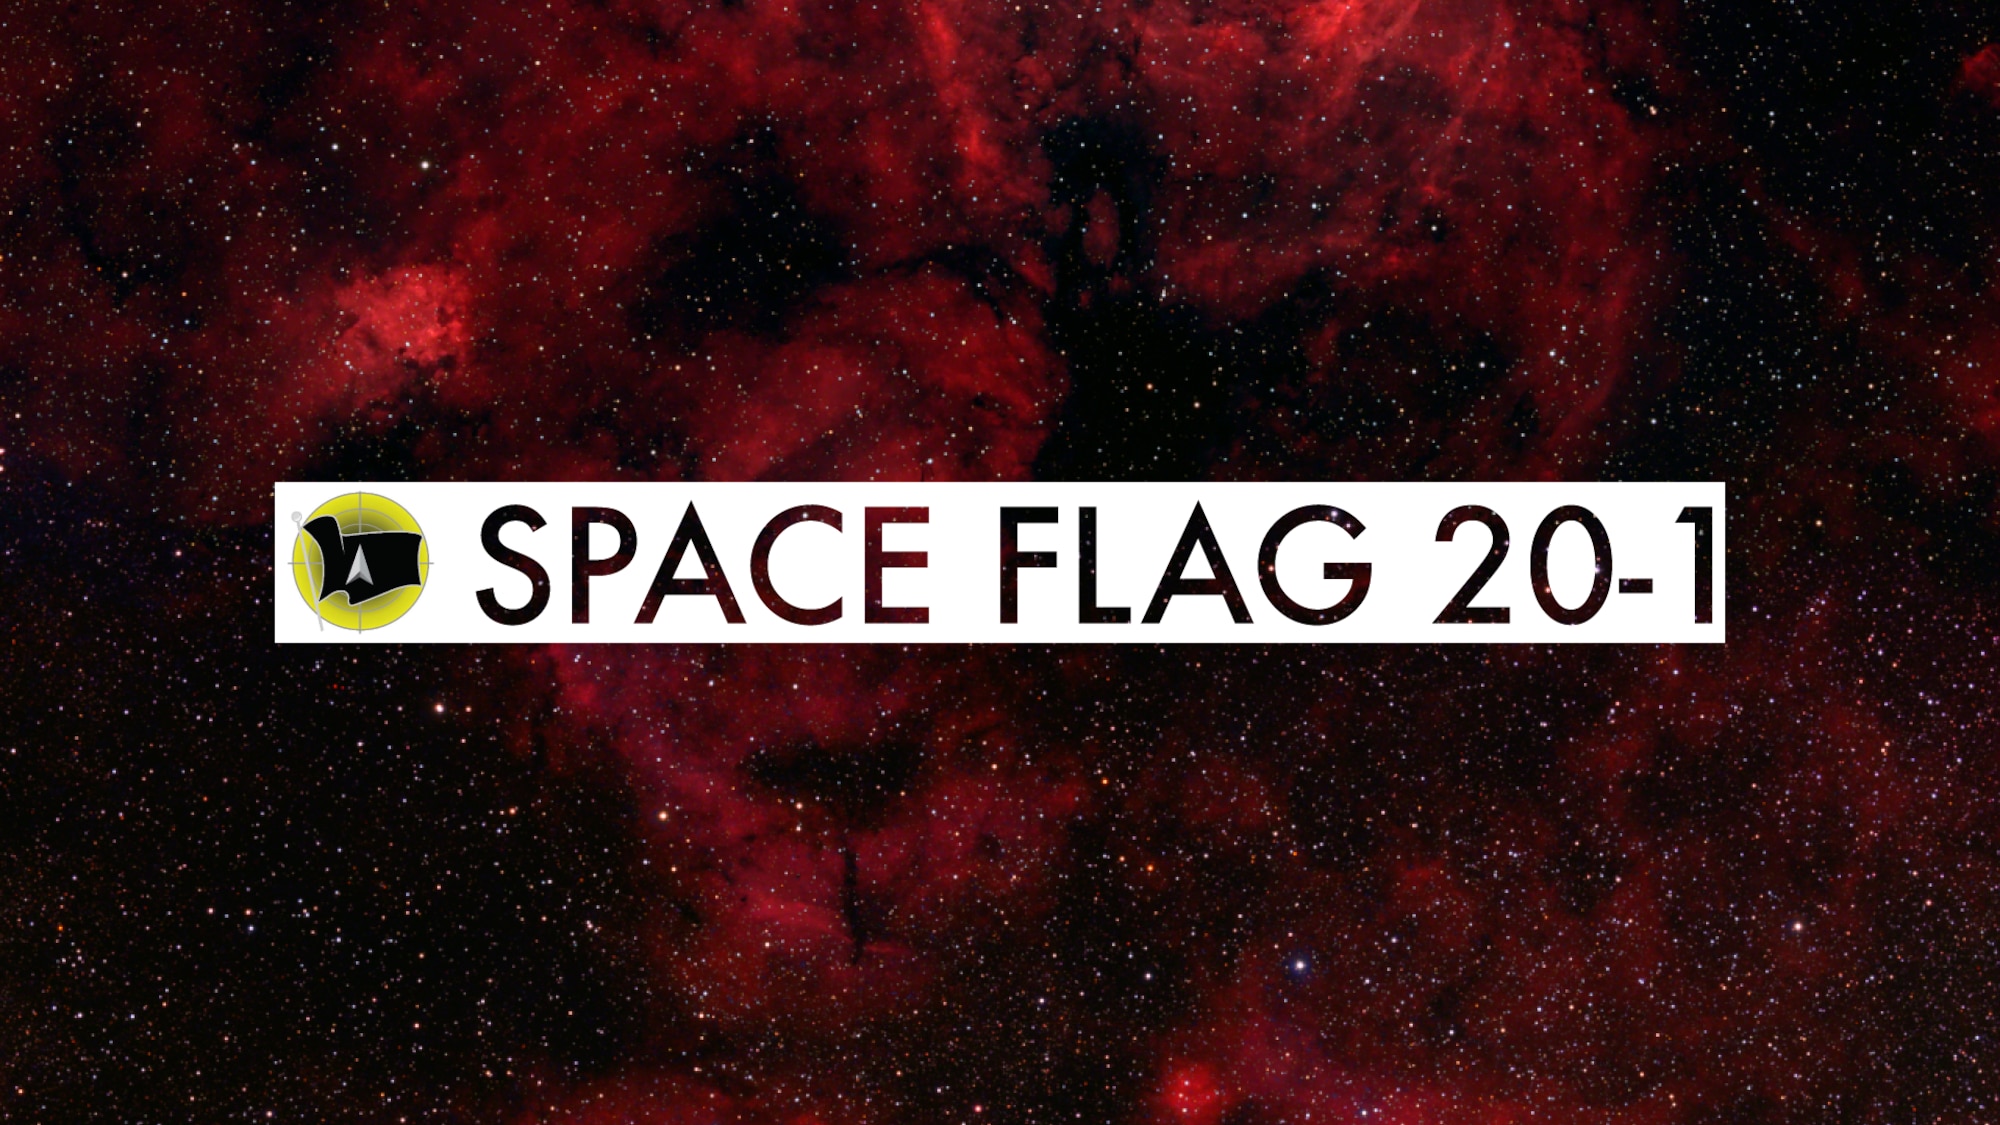 Space-superiority exercise, Space Flag, concluded successfully on U.S. Space Force birthday